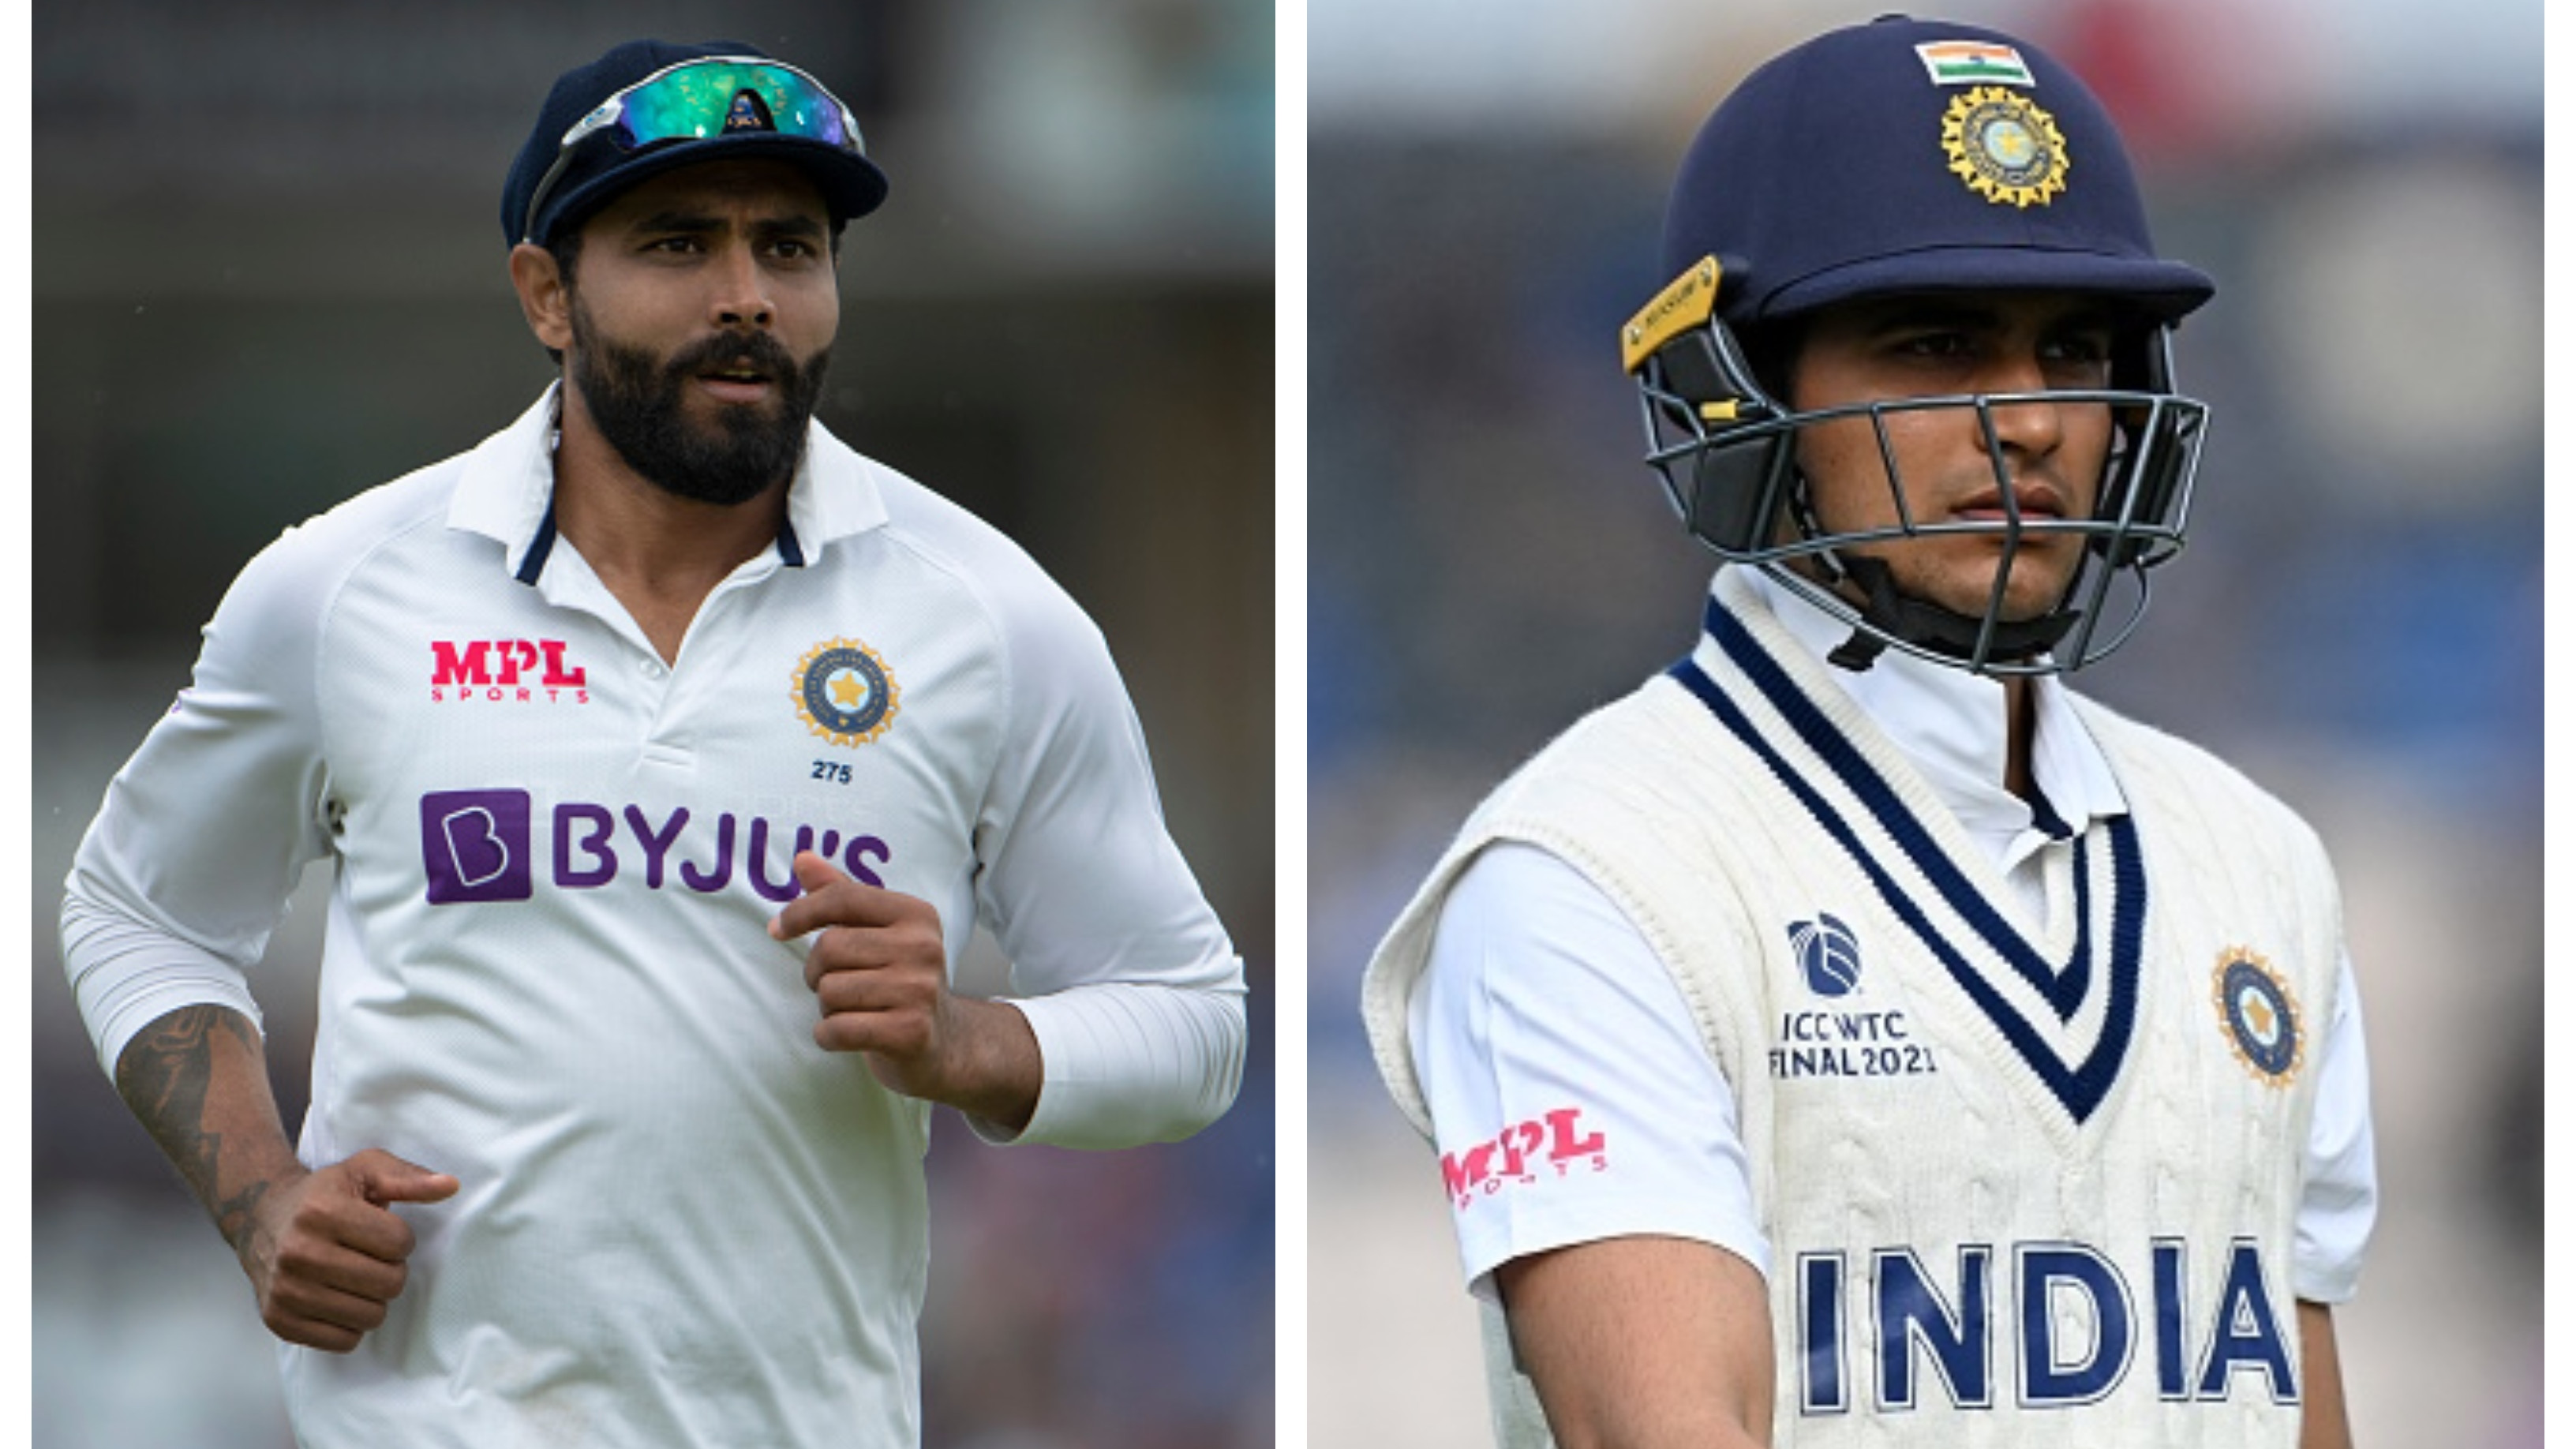 SA v IND 2021-22: Jadeja, Gill among 4 players likely to miss South Africa tour due to injury concerns – Report